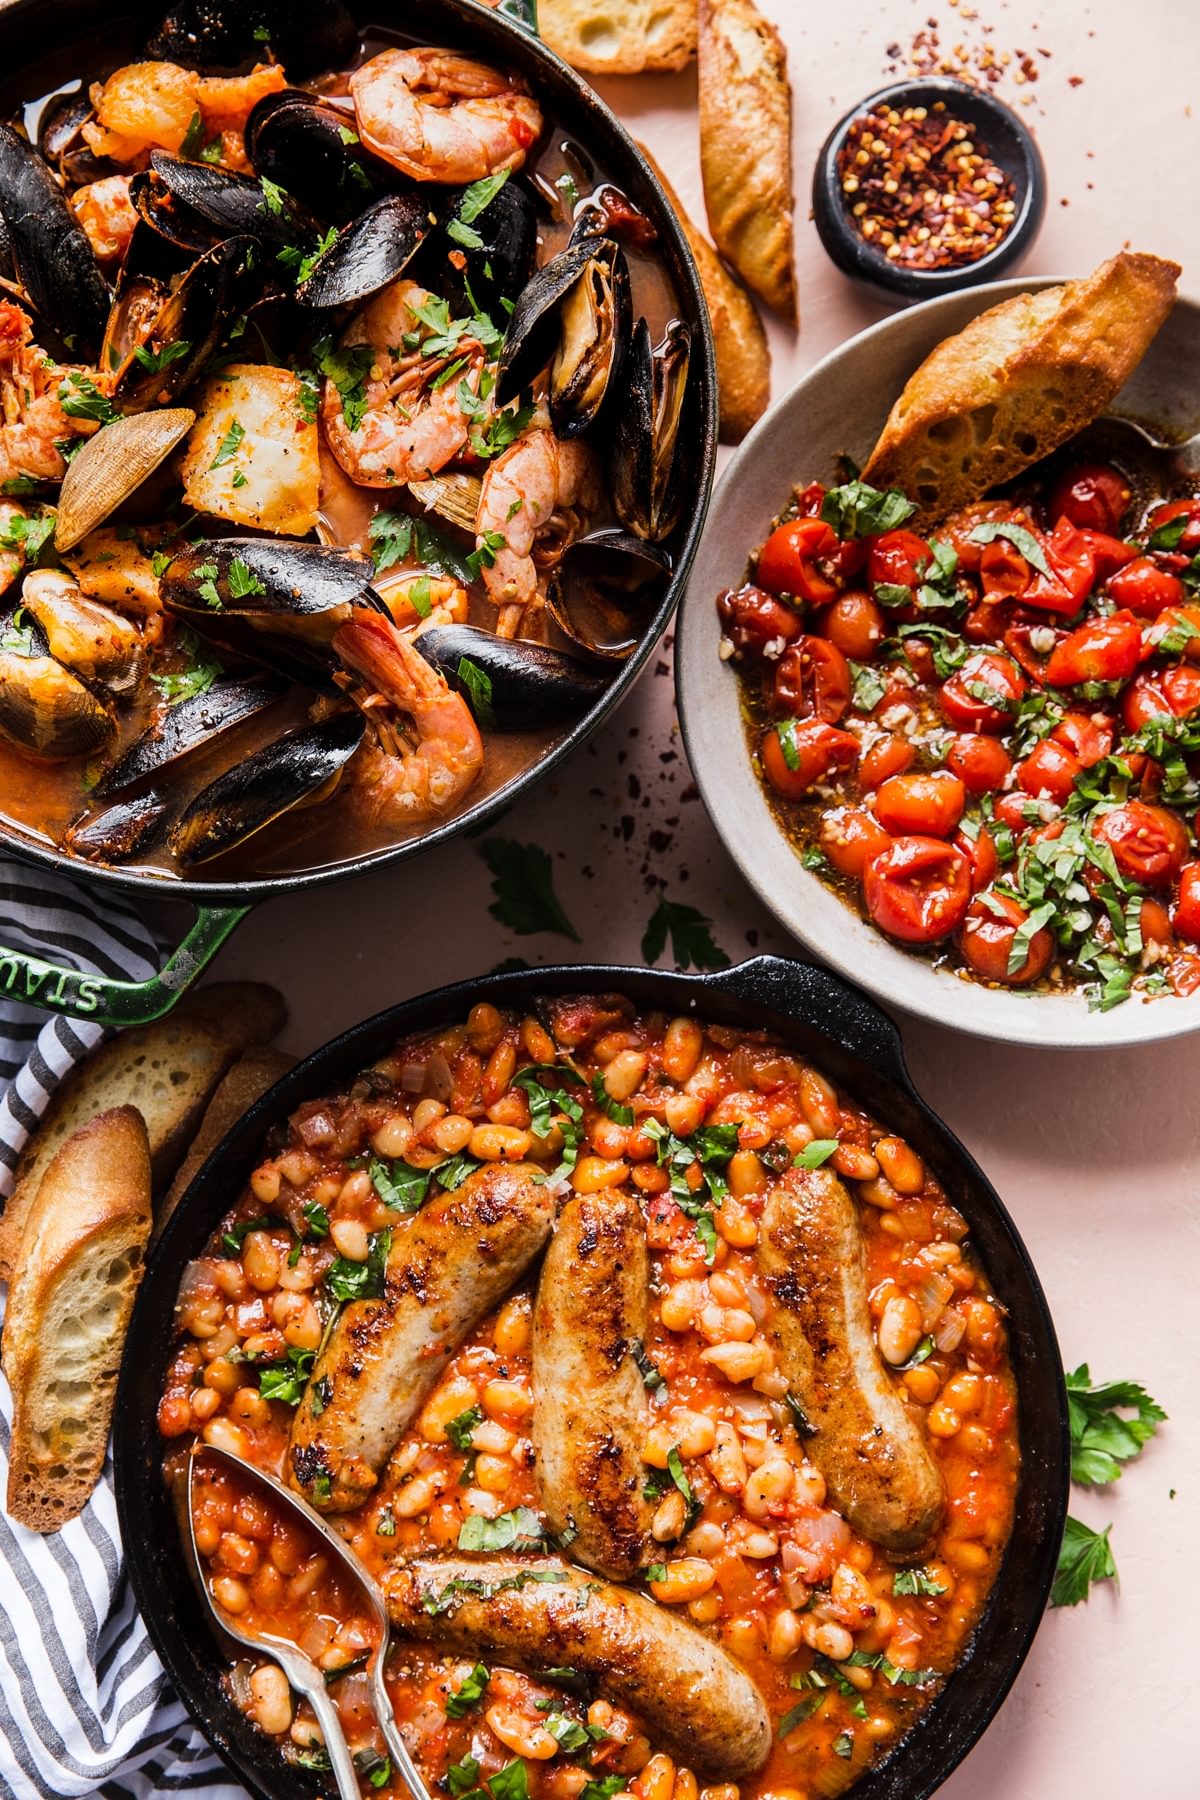 tomato Bruschetta, sausage Cassoulet and Cioppino with shrimp and muscles